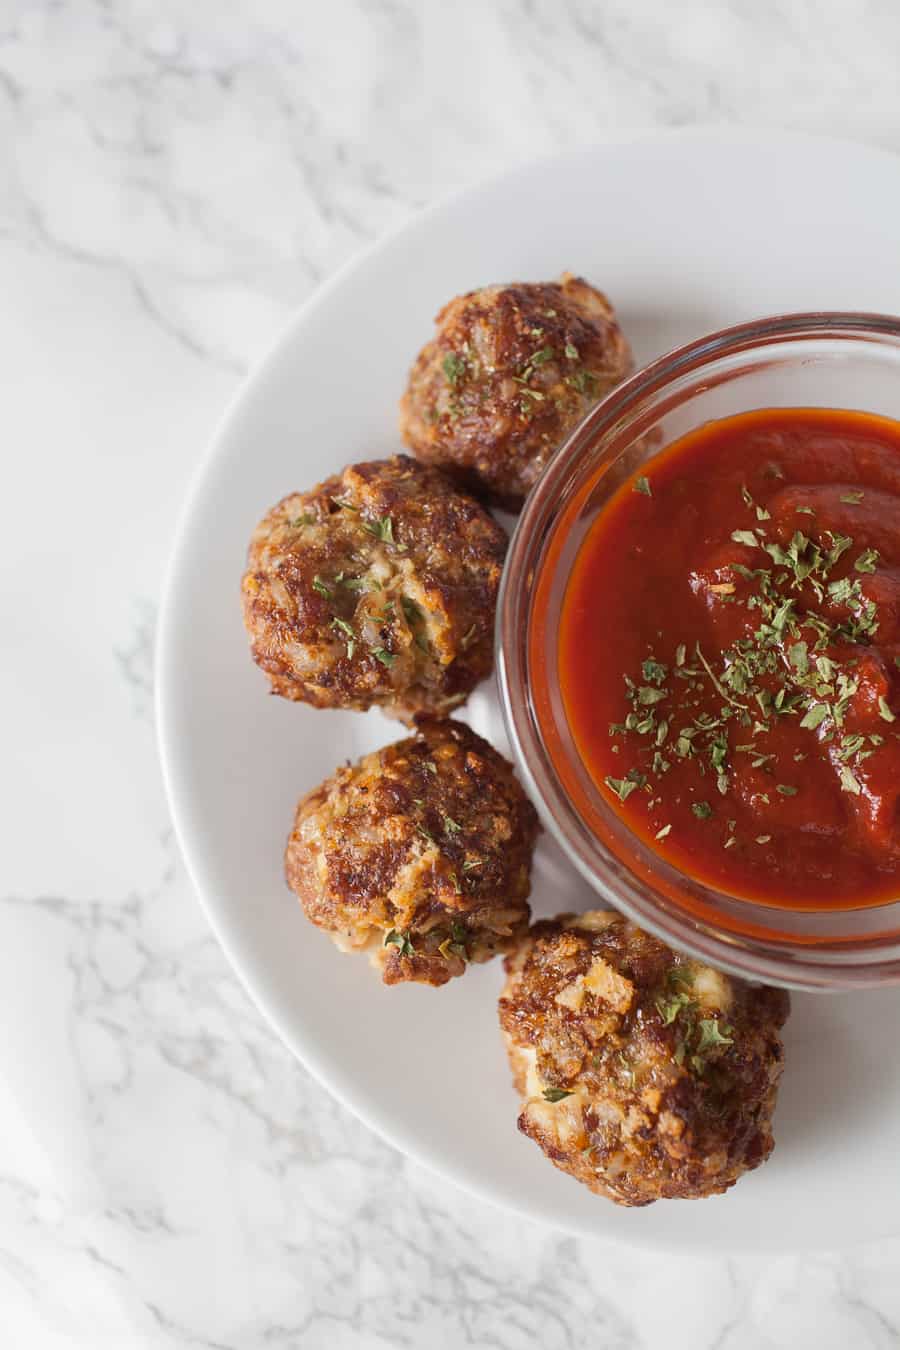 Looking for a quick and easy appetizer for the Big Game? These ricotta stuffed sausage meatballs are so easy to make. Your football friends will go wild for these quick baked ricotta stuffed sausage meatballs at your Big Game party! party food | meatballs from scratch | meatball recipes | meatballs | appetizer recipes | superbowl party food | football food